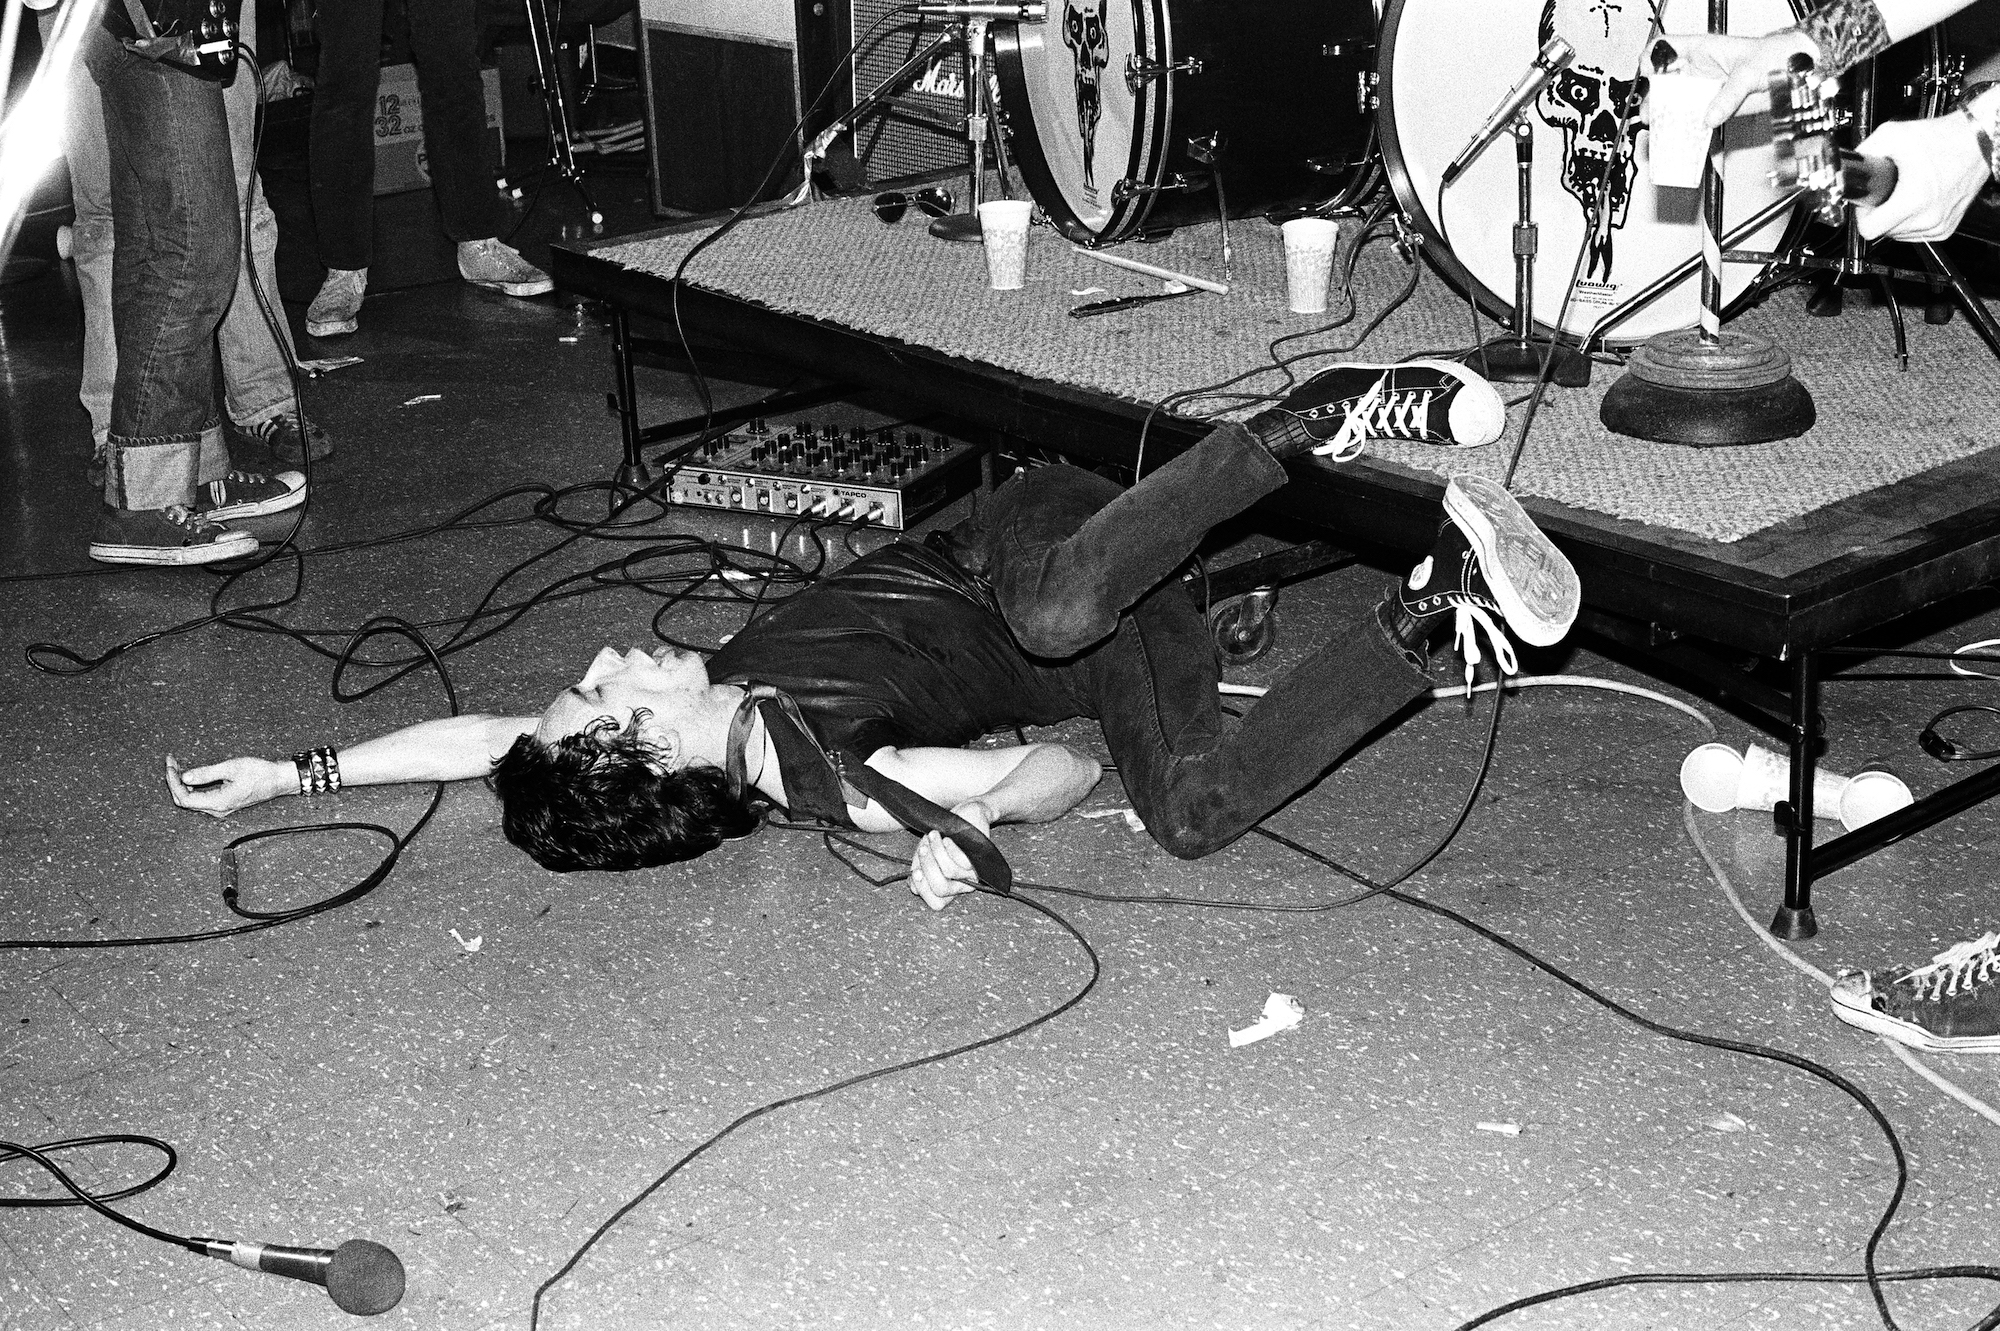 a man in a tie and converse falling off stage